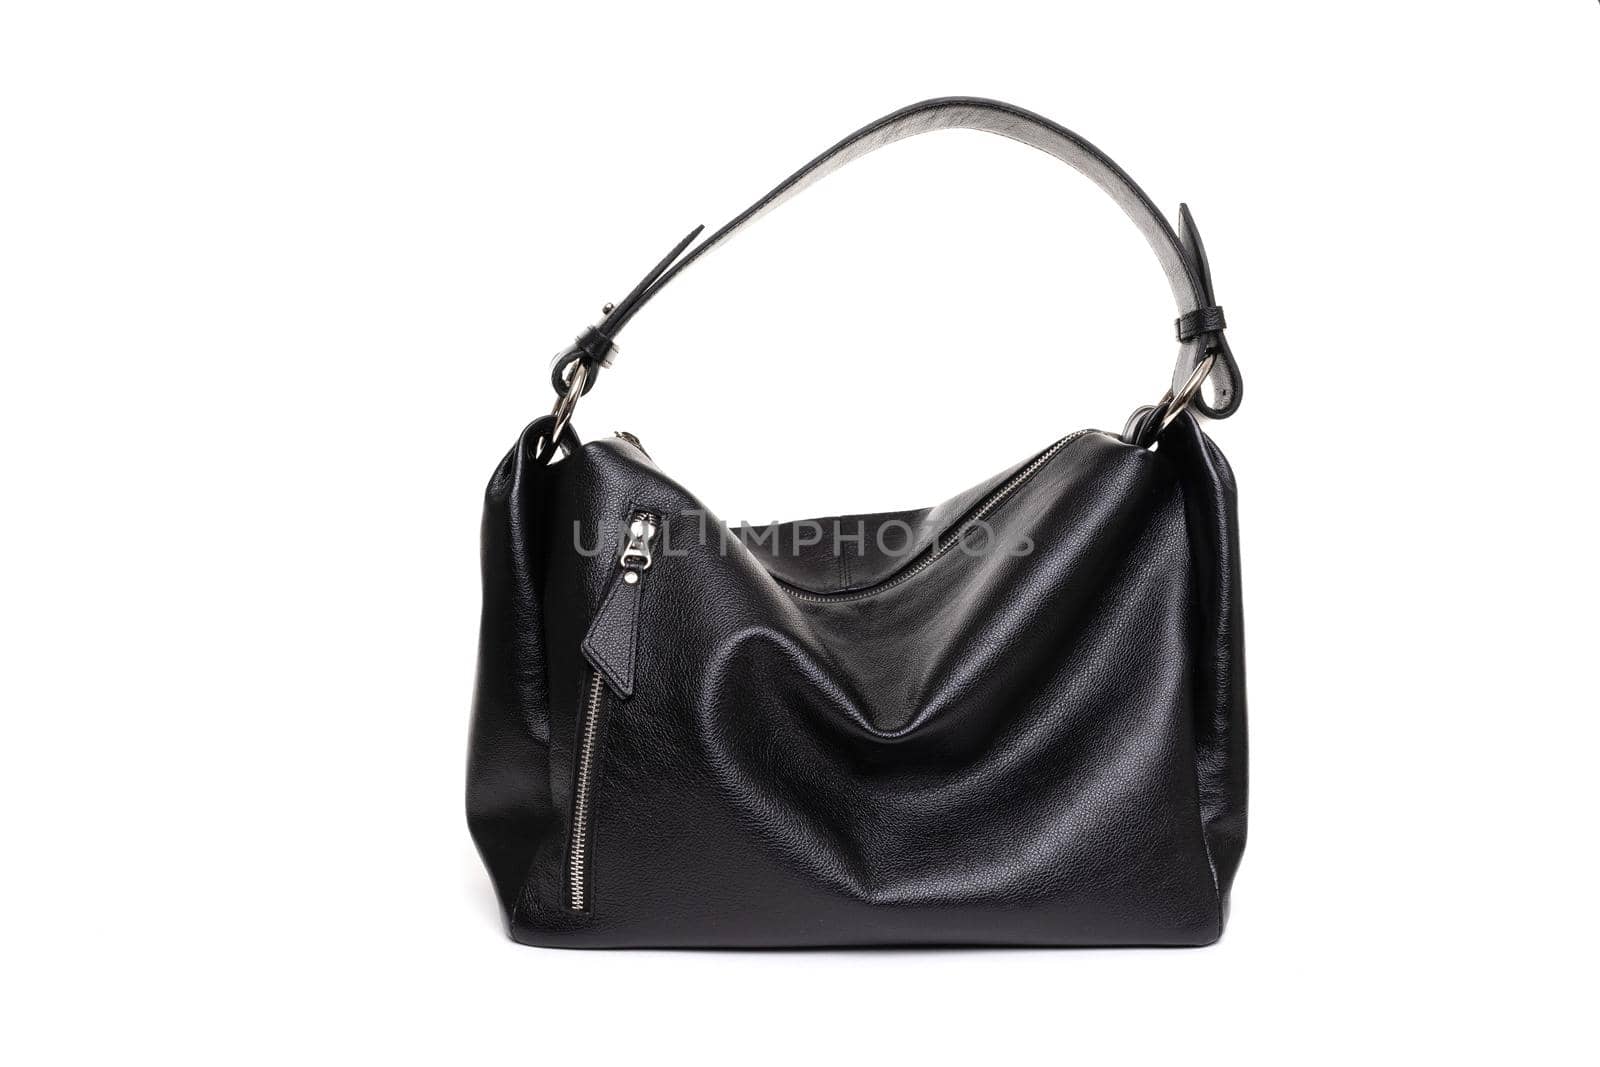 stylish leather women's bag made of soft black leather.